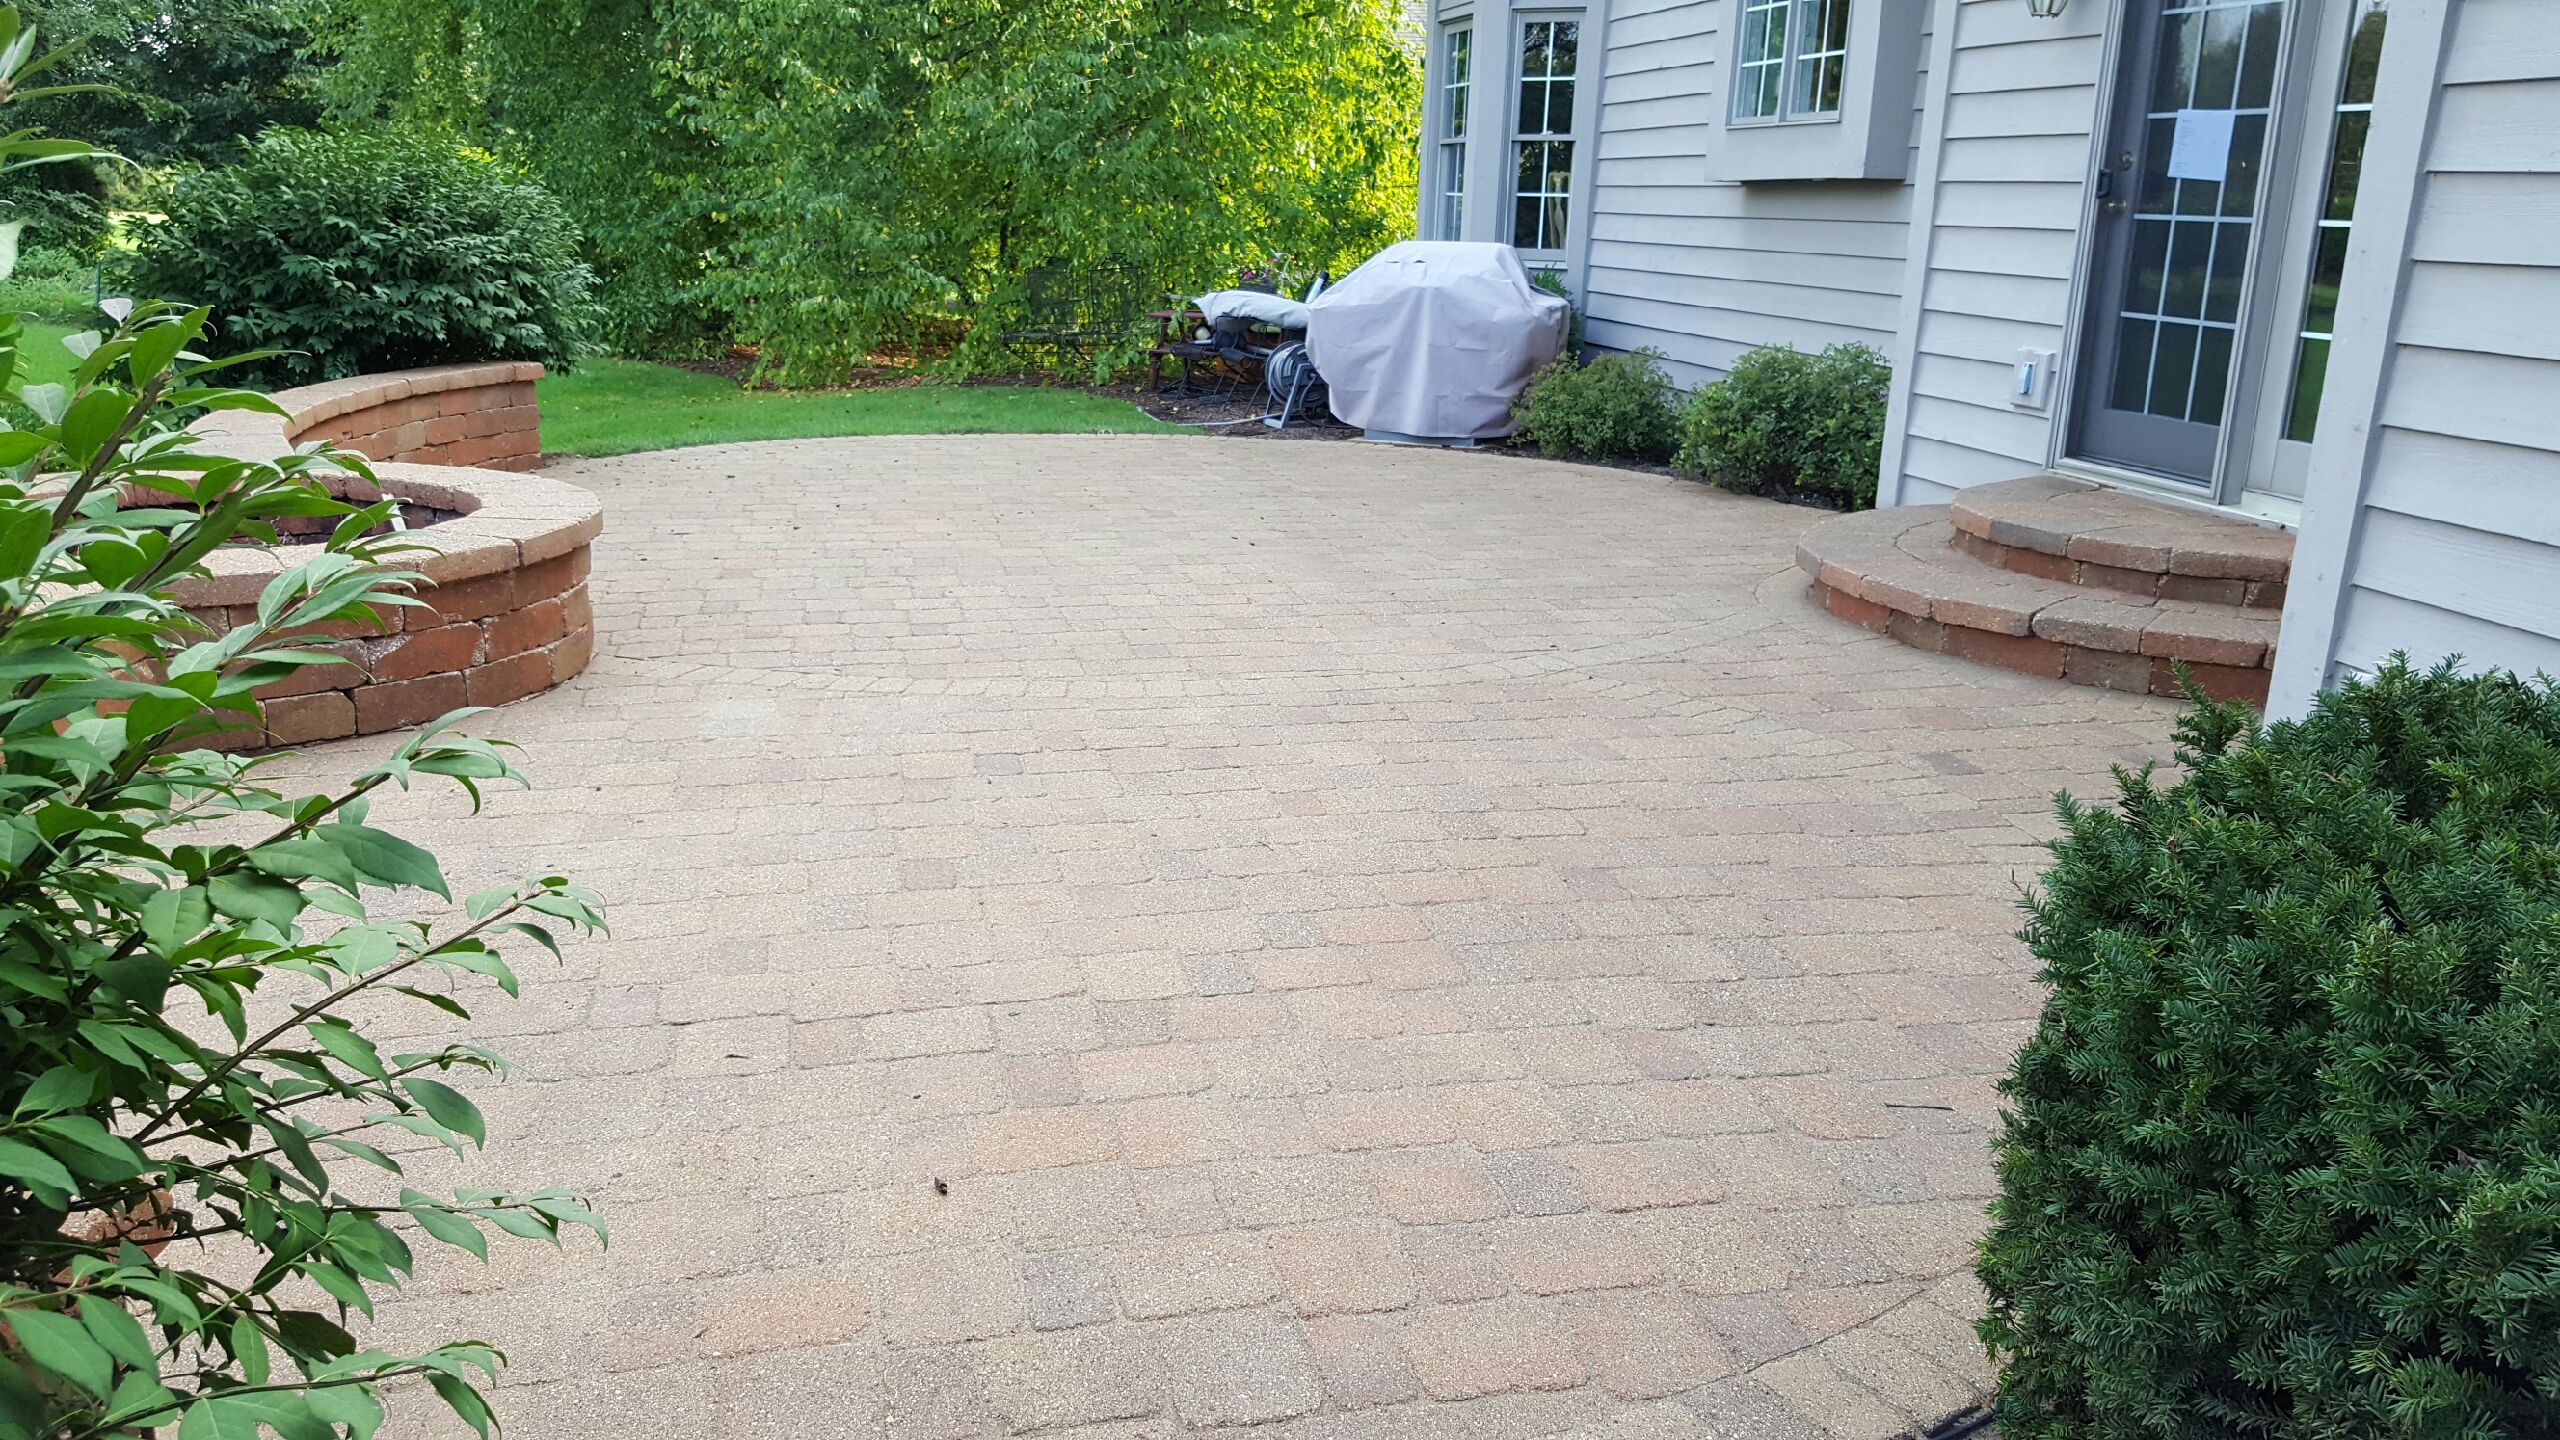 Brick PAver cleaning and sealing in St. Charles, IL